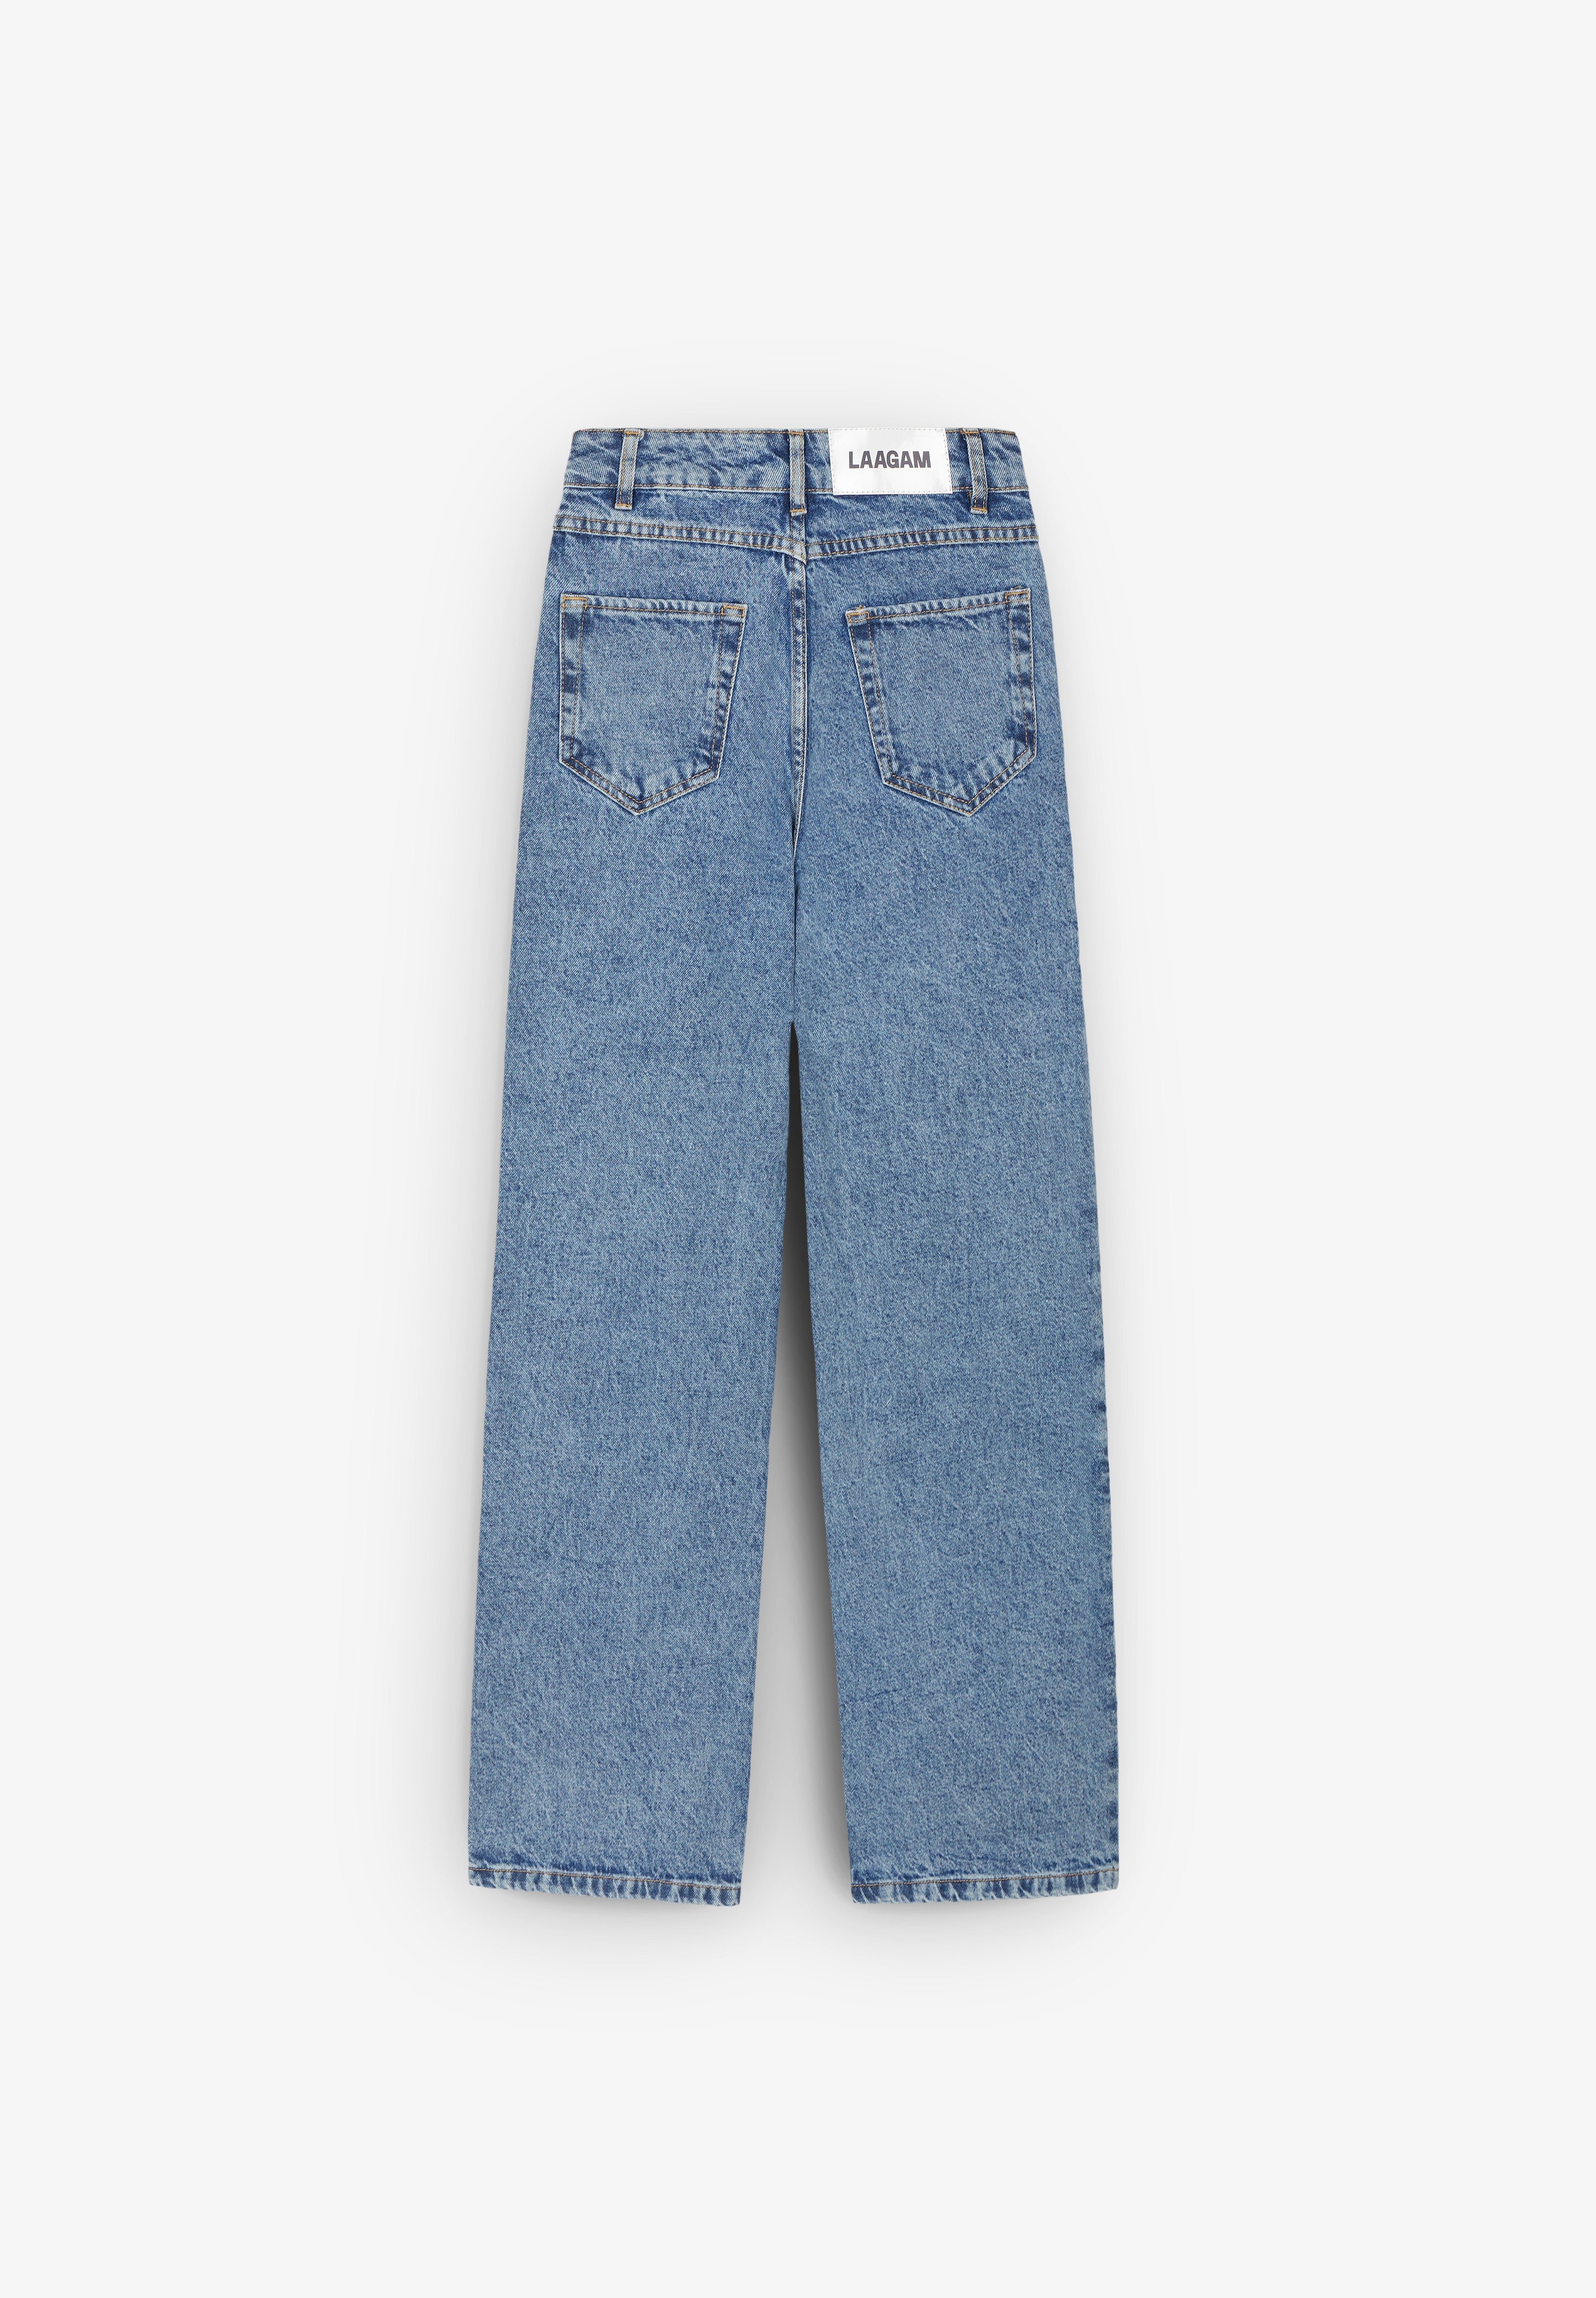 LAAGAM | THELMA LOW WAIST JEANS